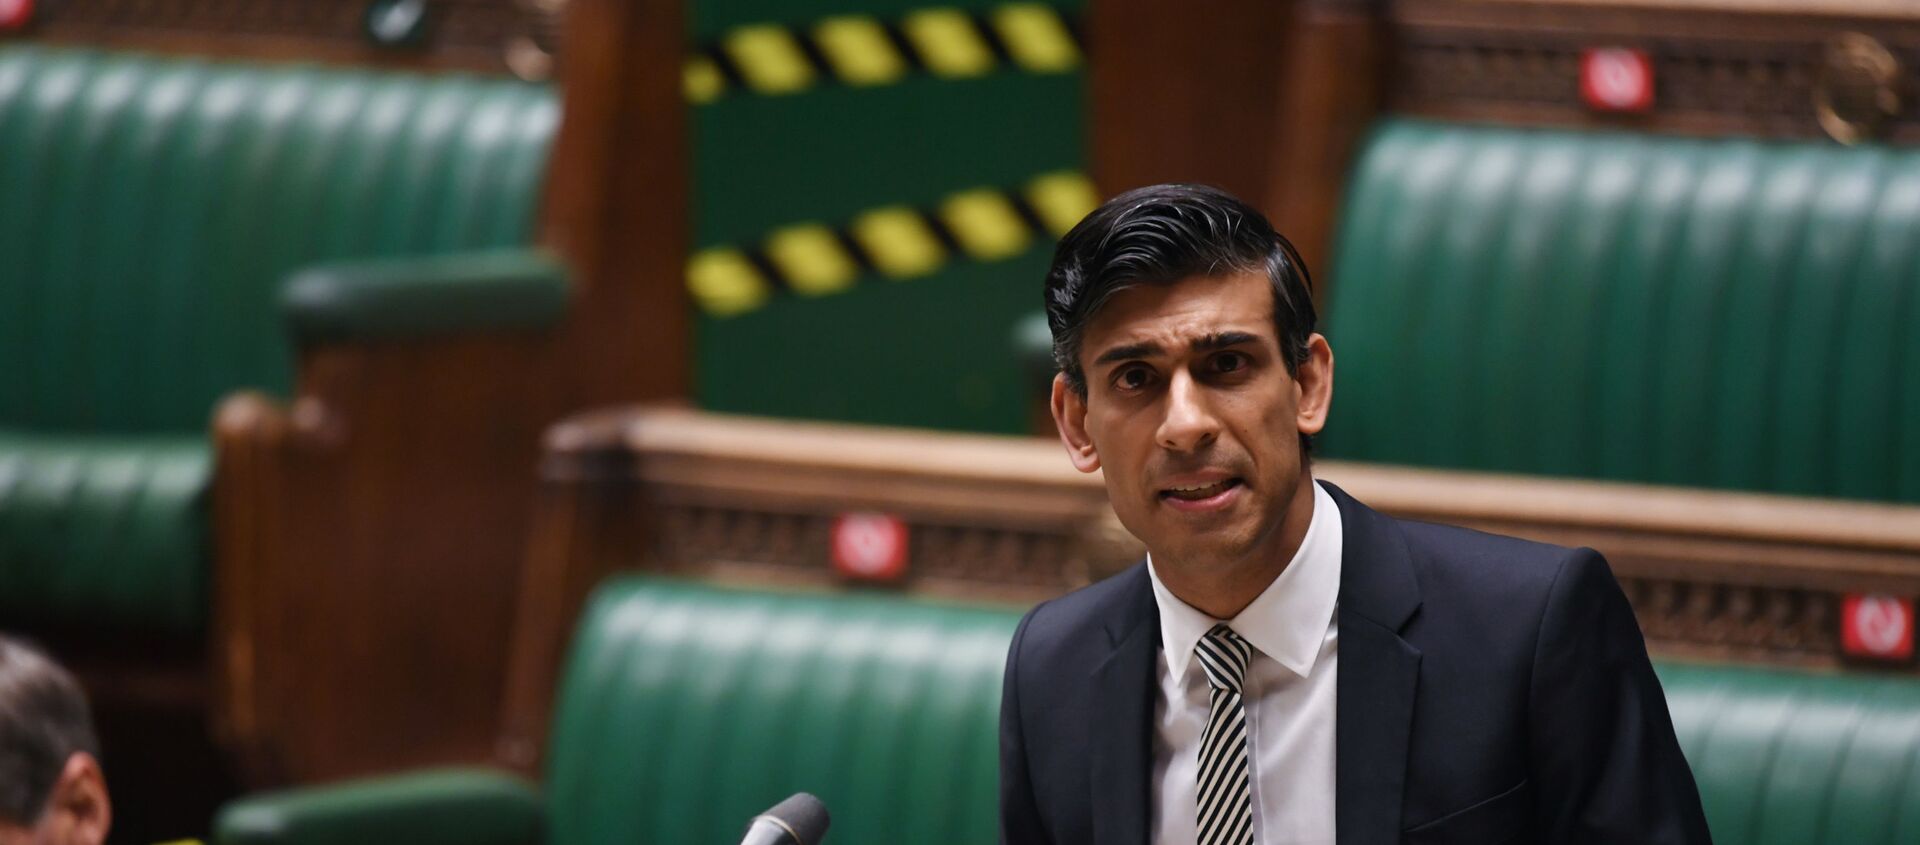 Britain's Chancellor of the Exchequer Rishi Sunak speaks at the House of Commons in London. - Sputnik International, 1920, 25.02.2021